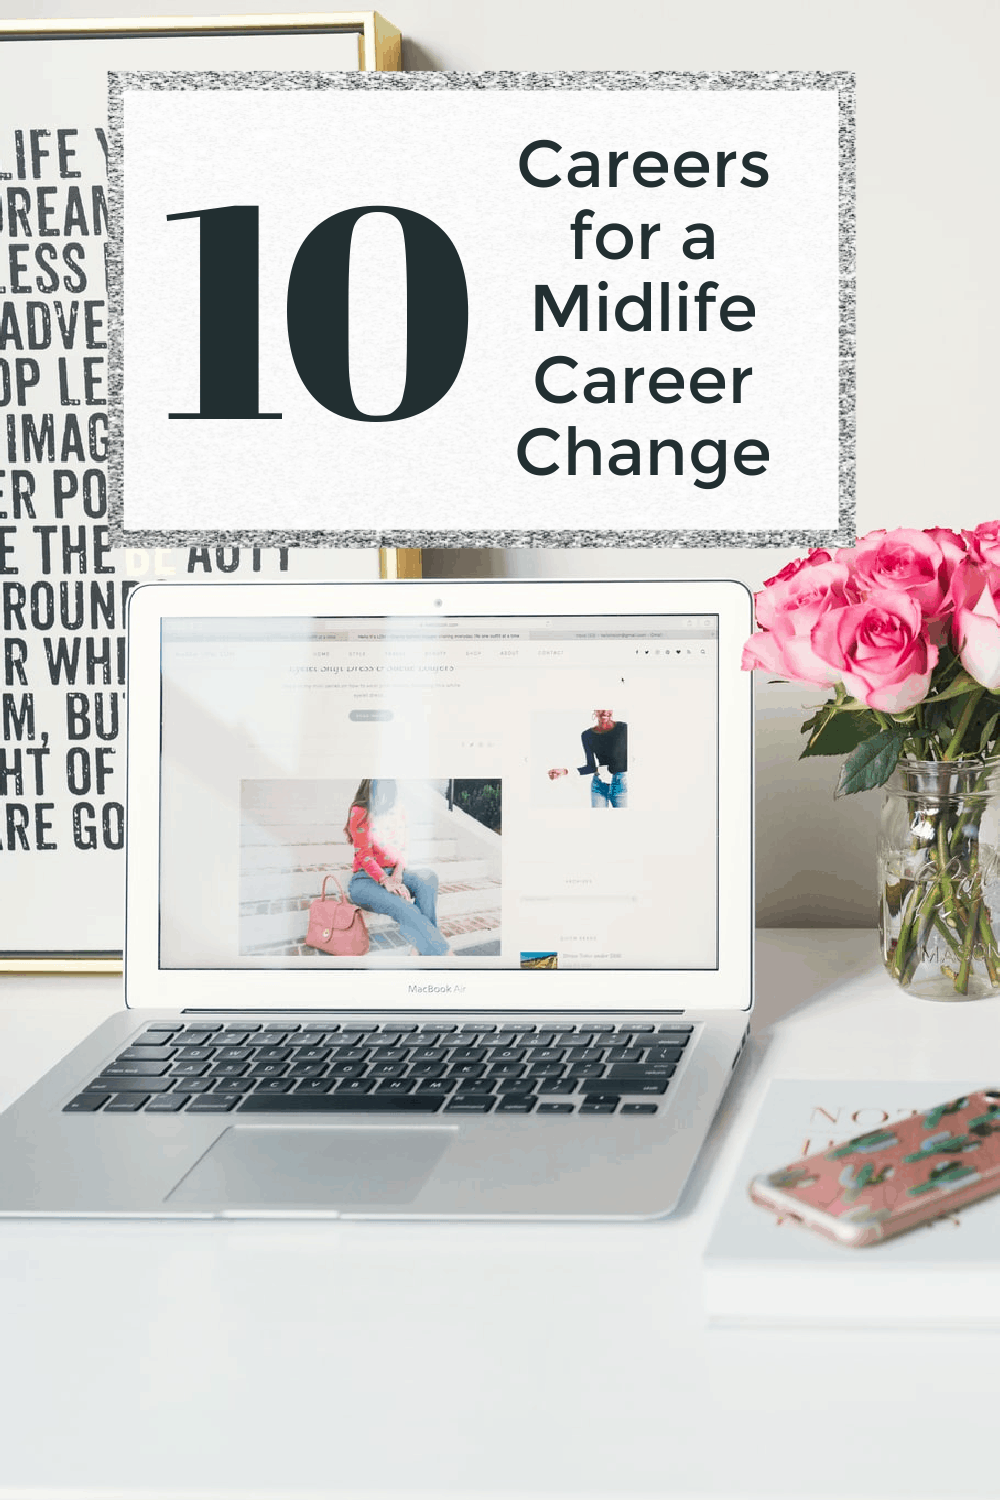 10 Careers for a Midlife Career Change